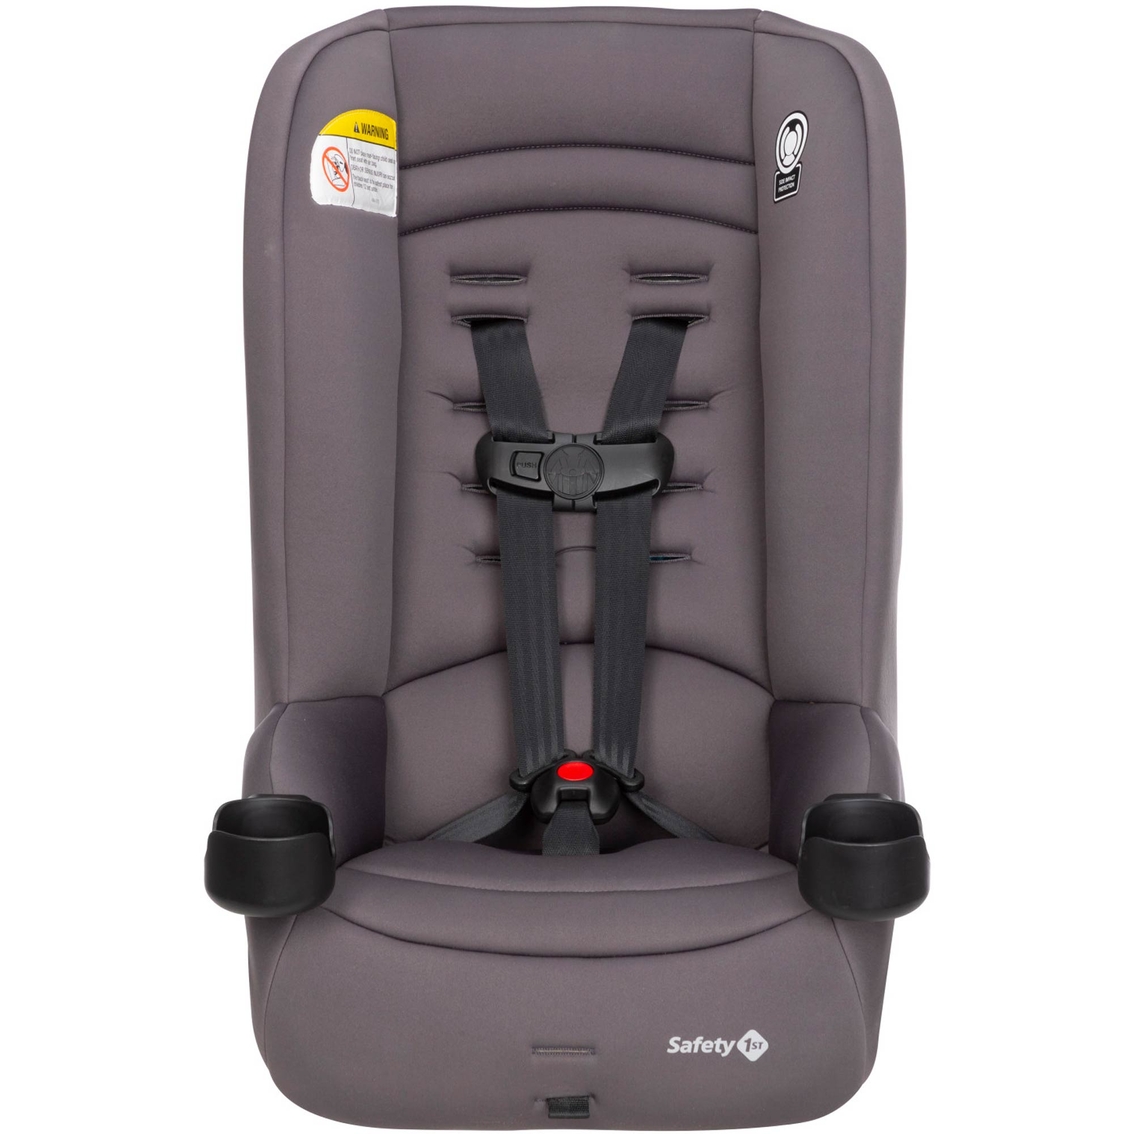 Safety 1st Jive 2 in 1 Convertible Car Seat - Image 4 of 10